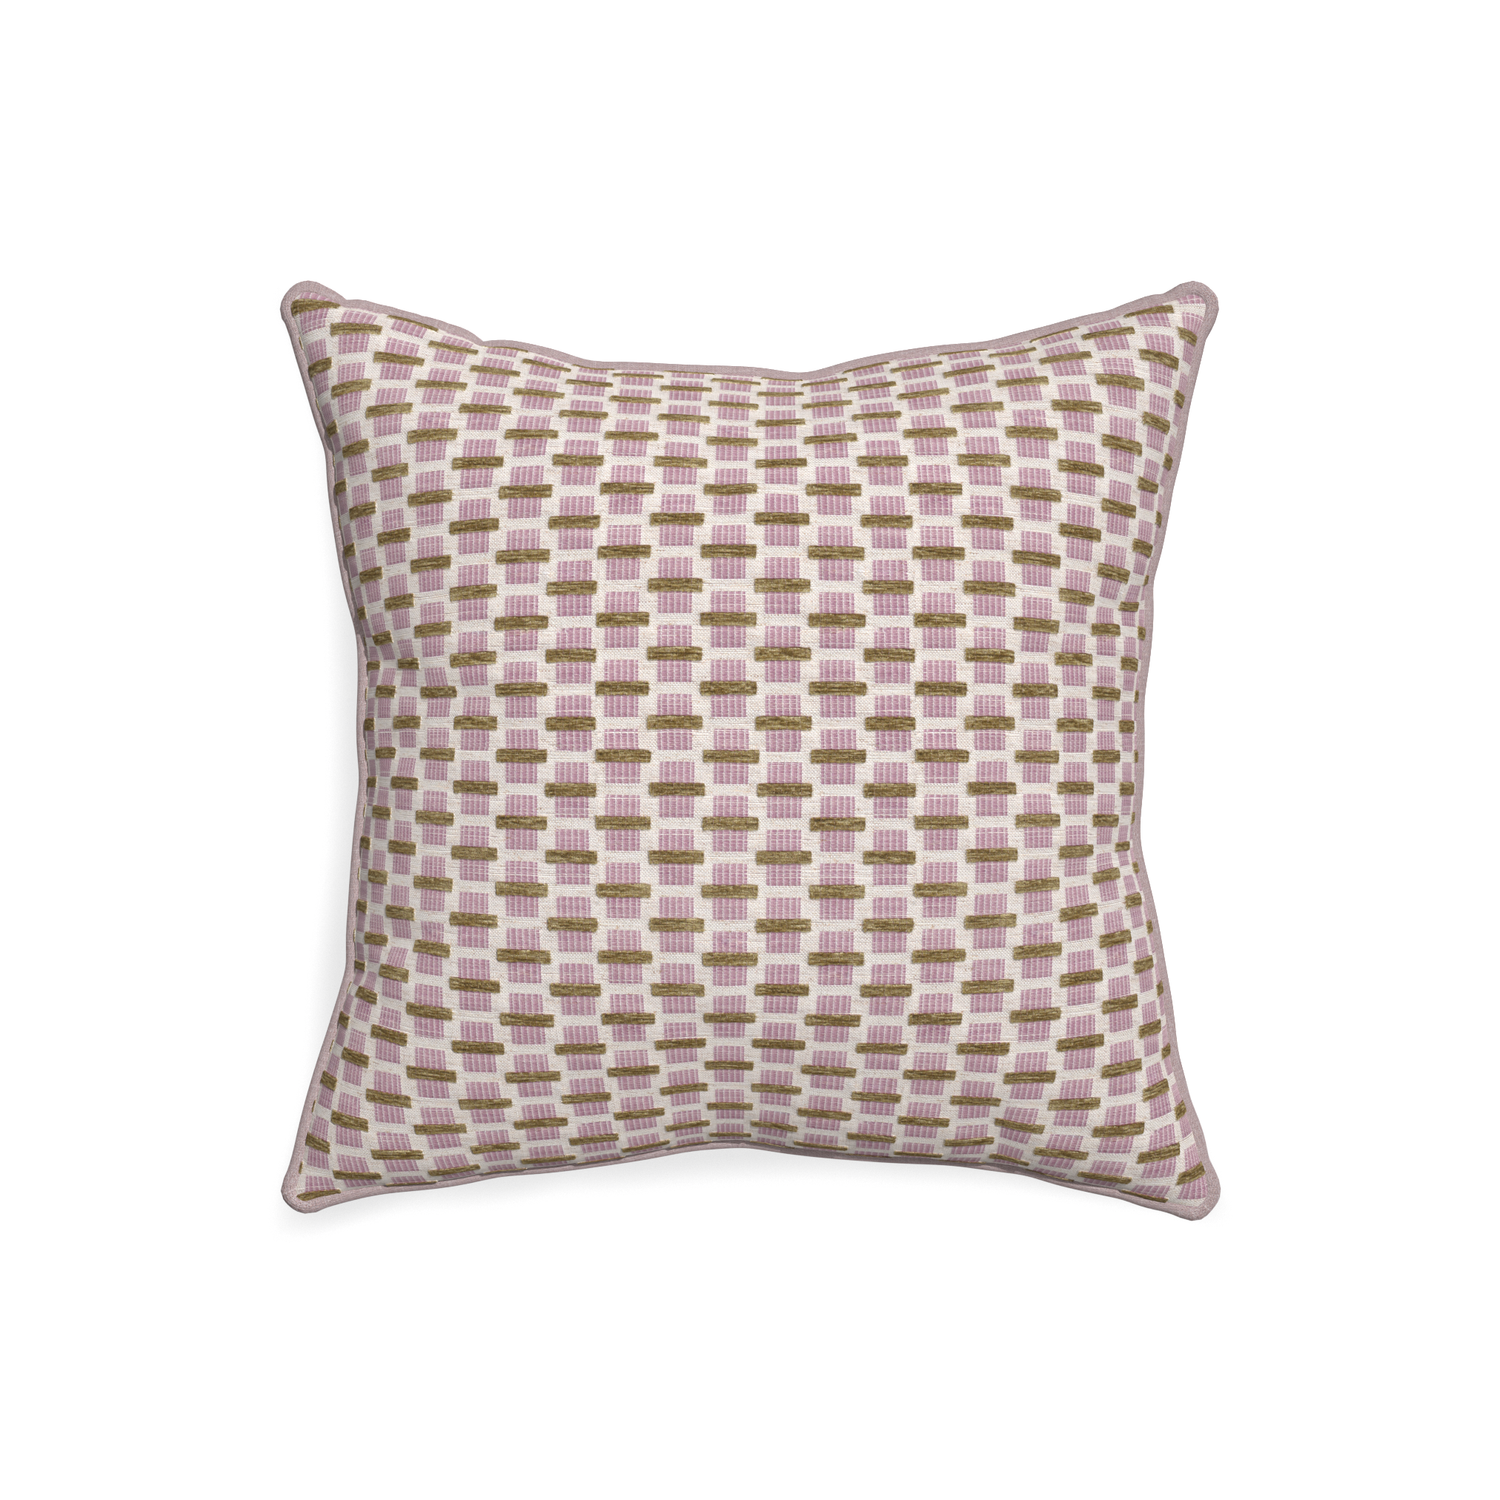 20-square willow orchid custom pink geometric chenillepillow with orchid piping on white background